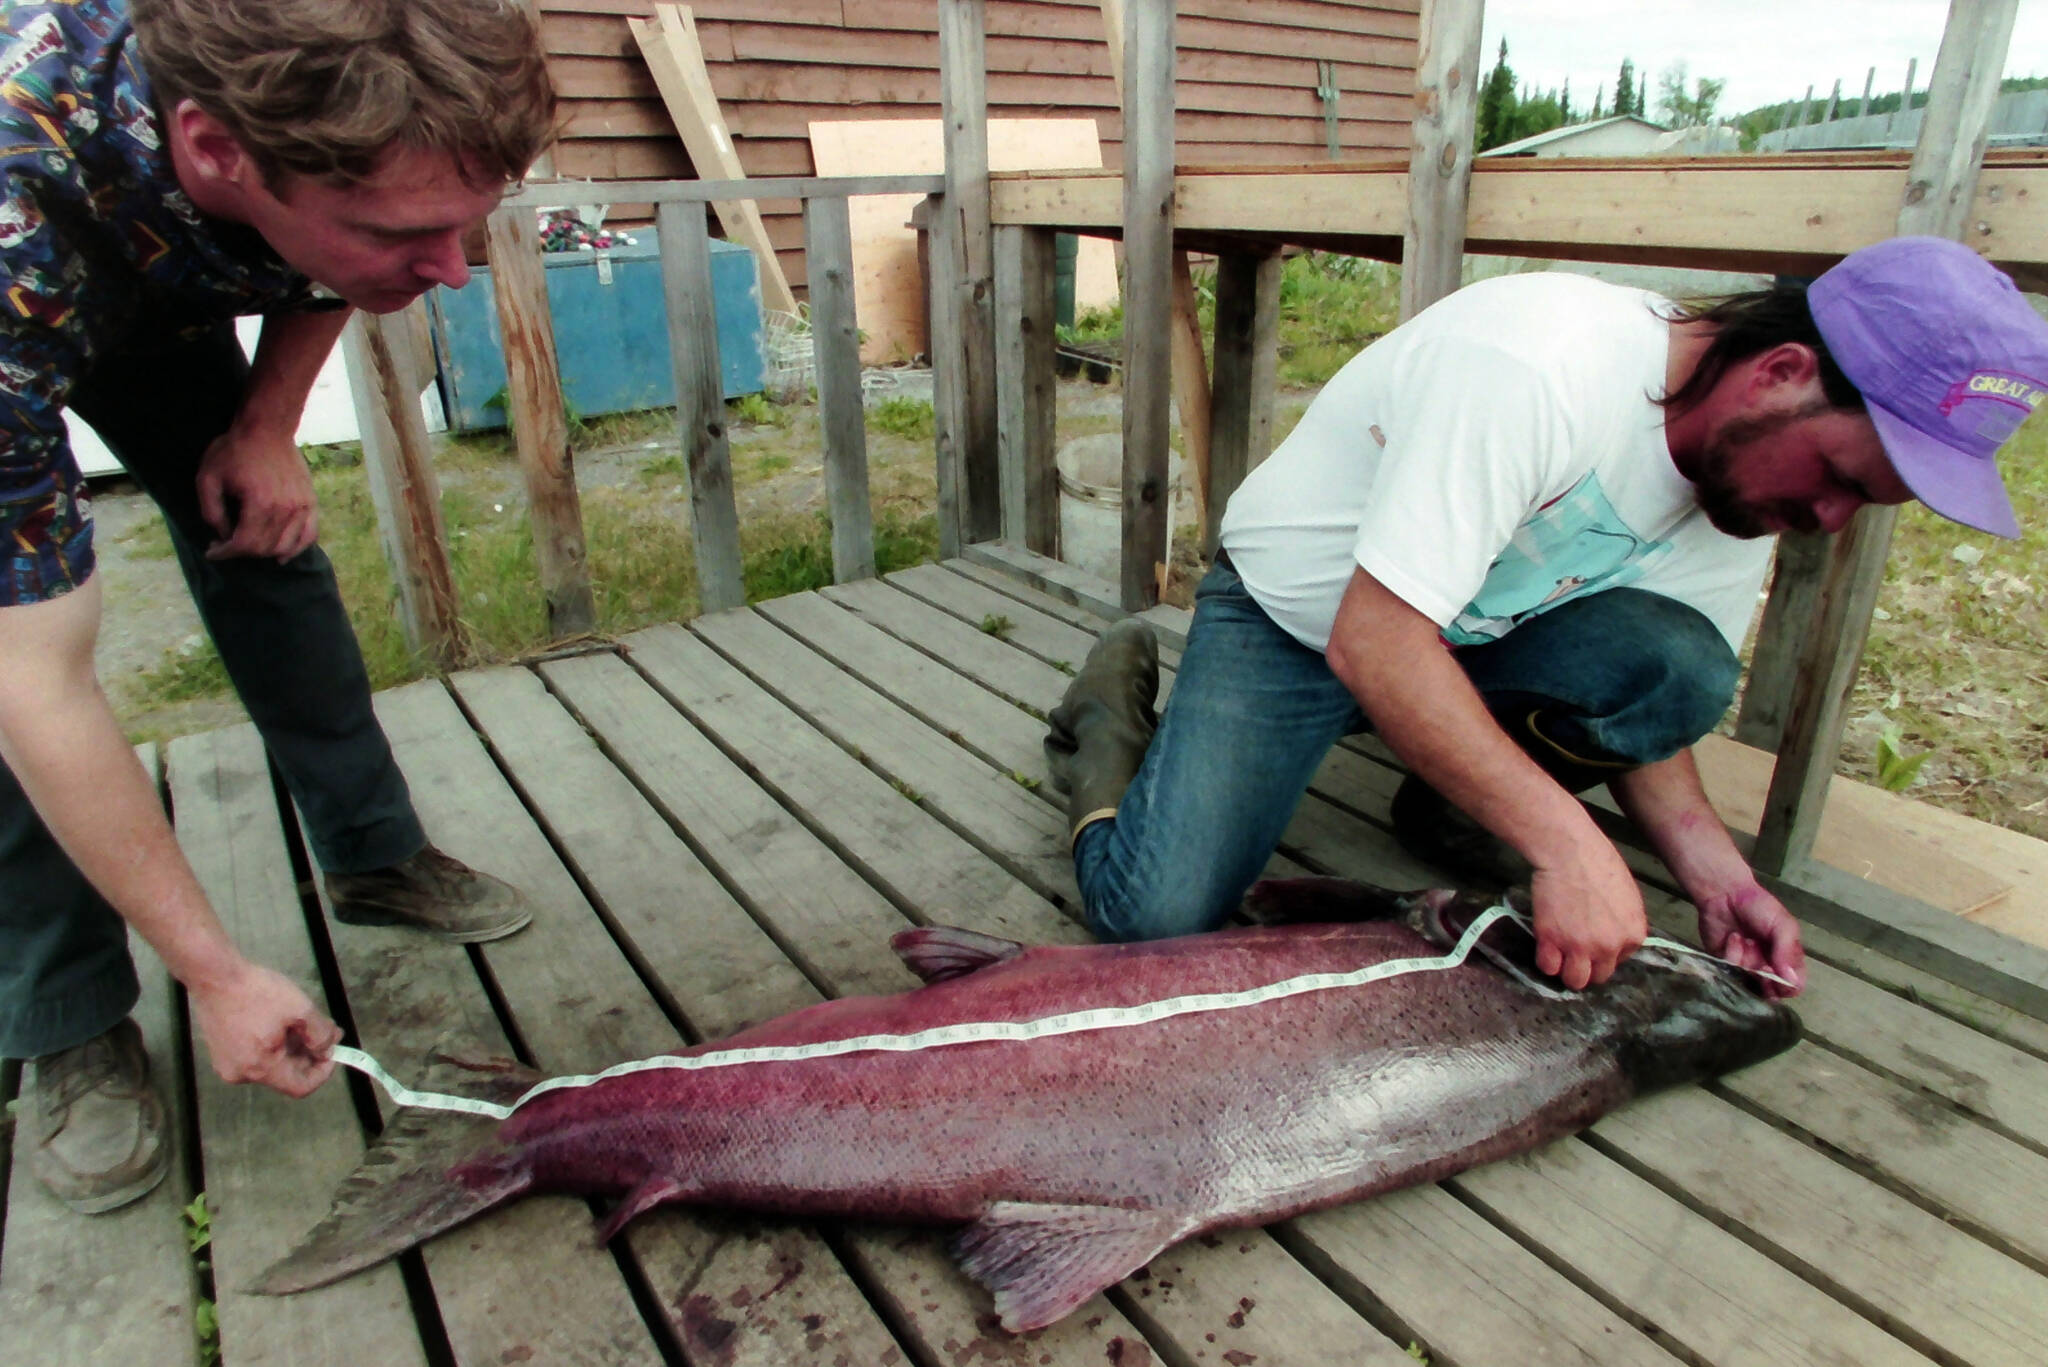 An 86 pound Kenai River king salmon is measured by fishing guide Jeff Moore in Soldotna, Alaska, on June 29, 1995. (M. Scott Moon/Peninsula Clarion File)